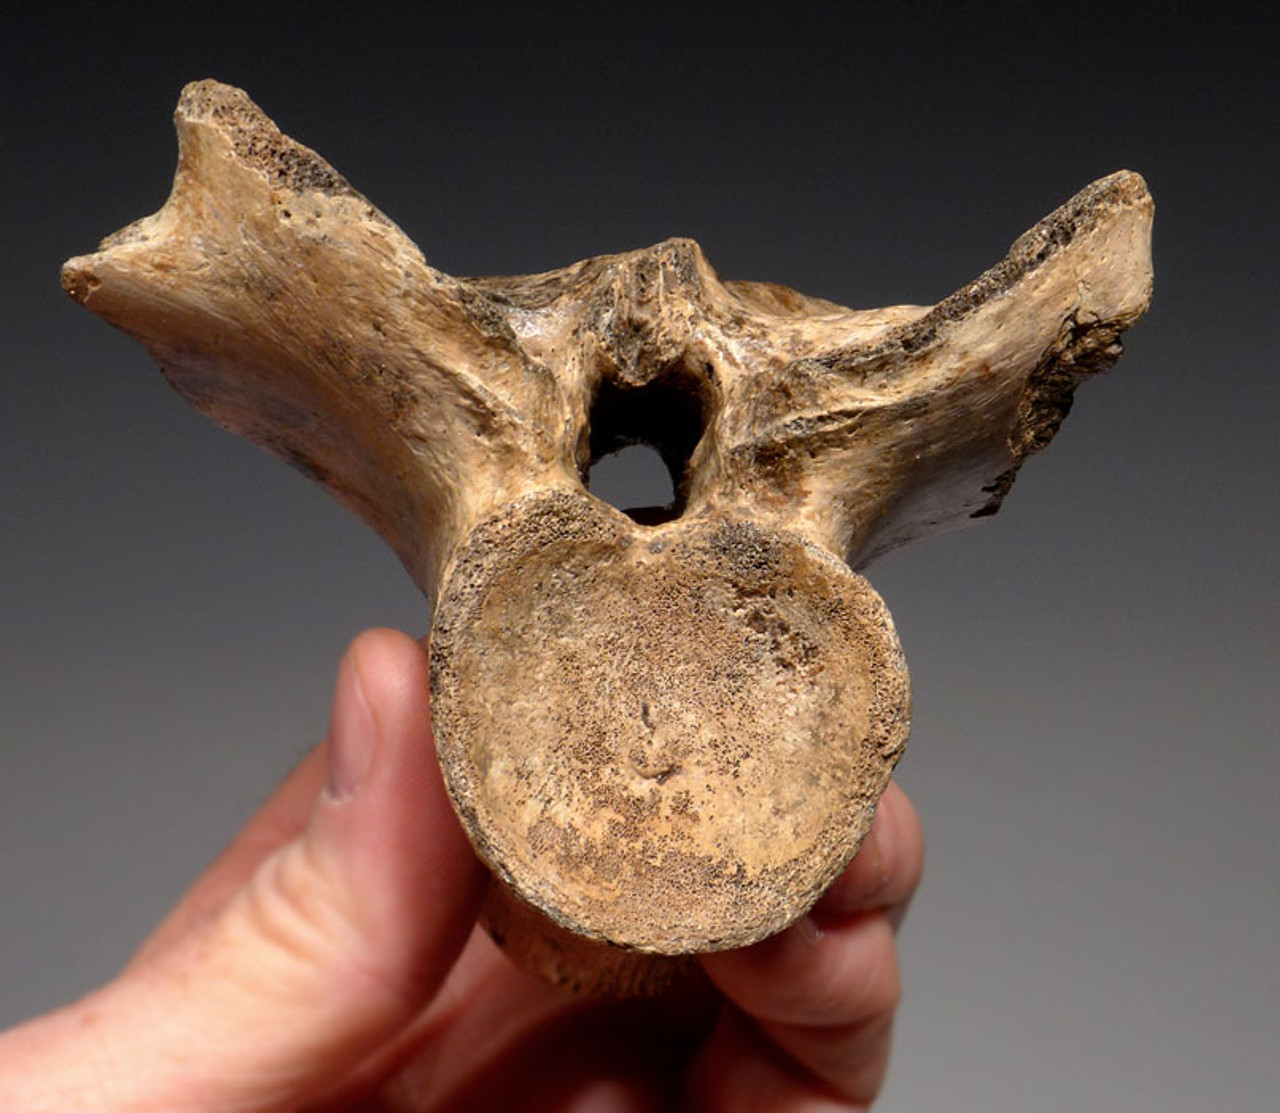 CROC018 - EXTREMELY RARE PAIR OF FOSSIL CROCODILE VERTEBRAE AND ARMOR FROM JAVA MAN DEPOSITS